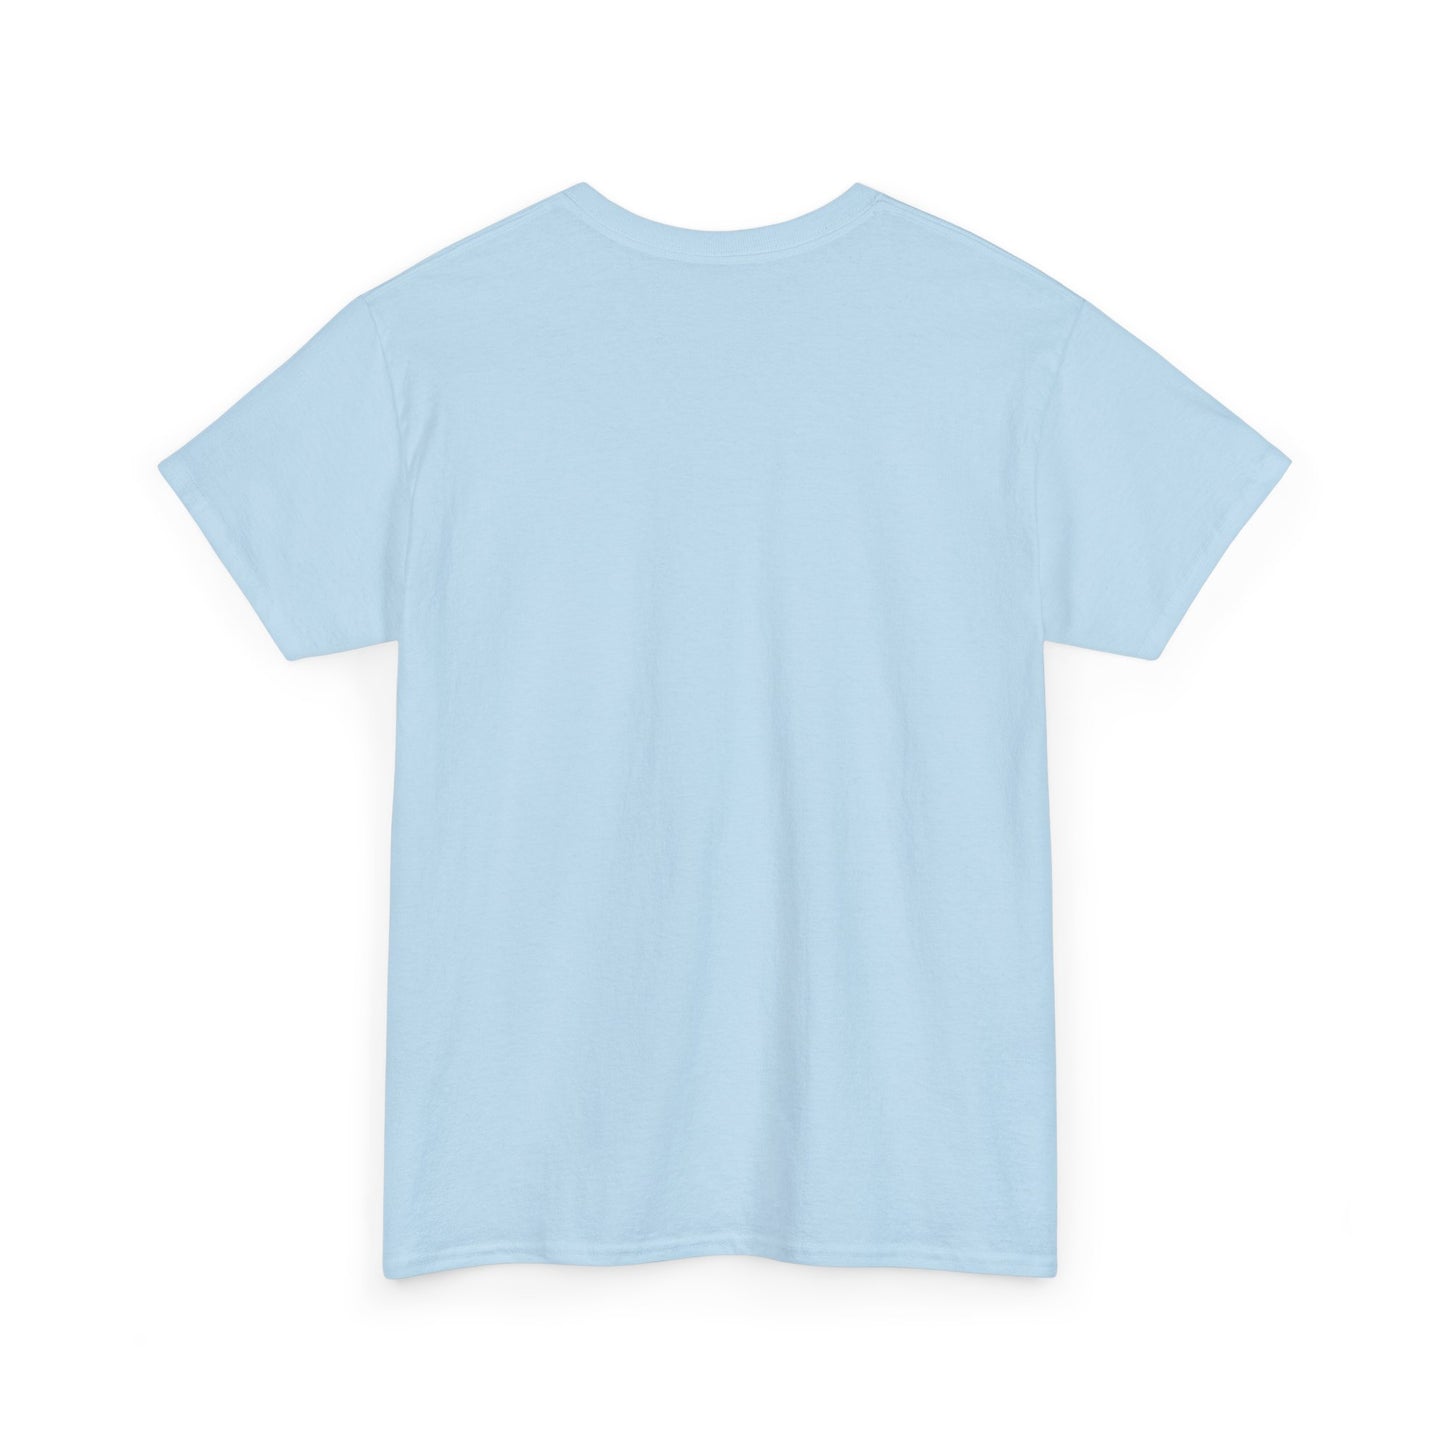 Unisex Heavy Cotton Tee Many colors and sizes by Refn